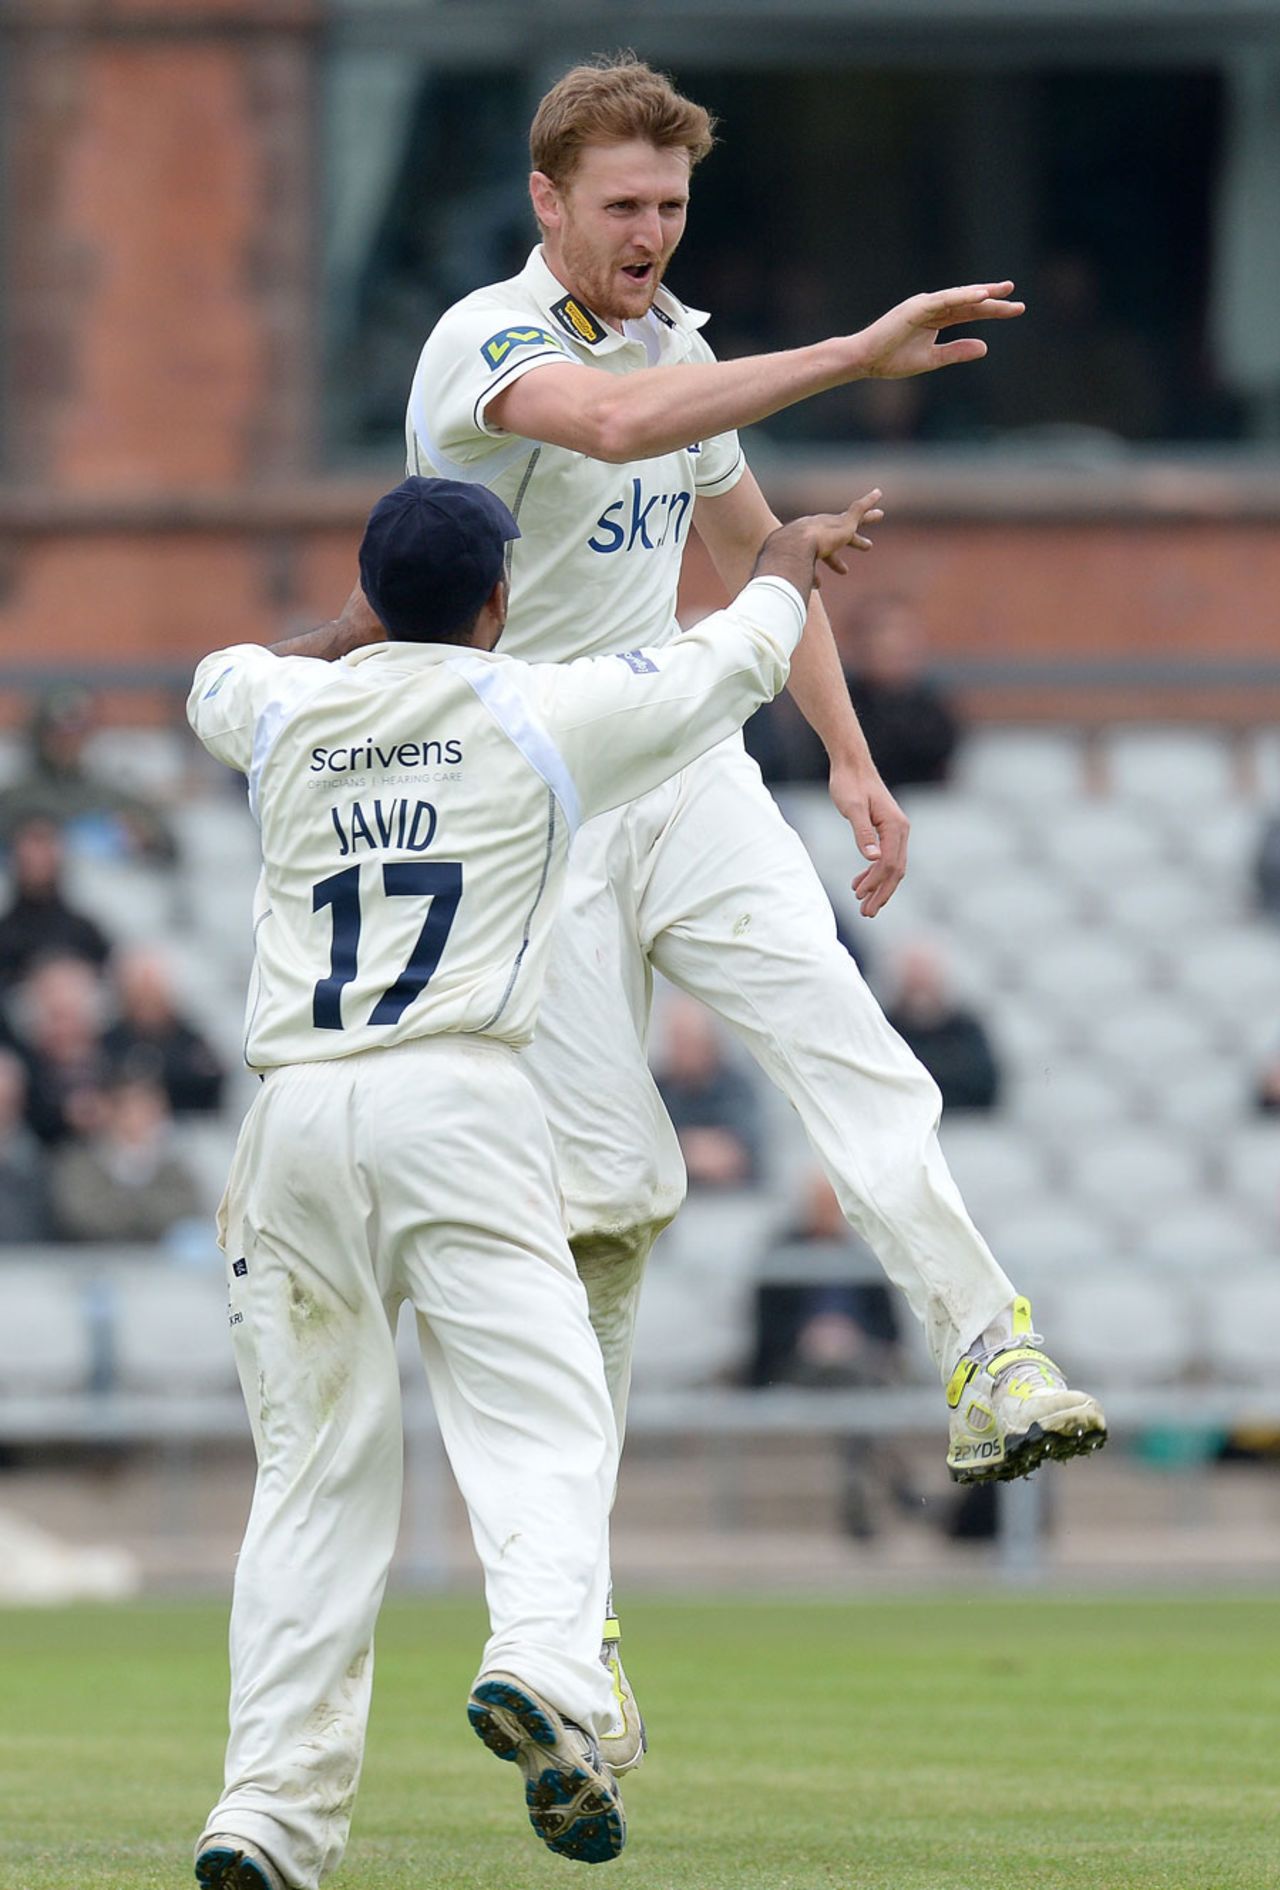 Oliver Hannon-Dalby celebrates one of his two wickets, Lancashire v Warwickshire, County Championship, Division One, Old Trafford, 4th day, April 23, 2014